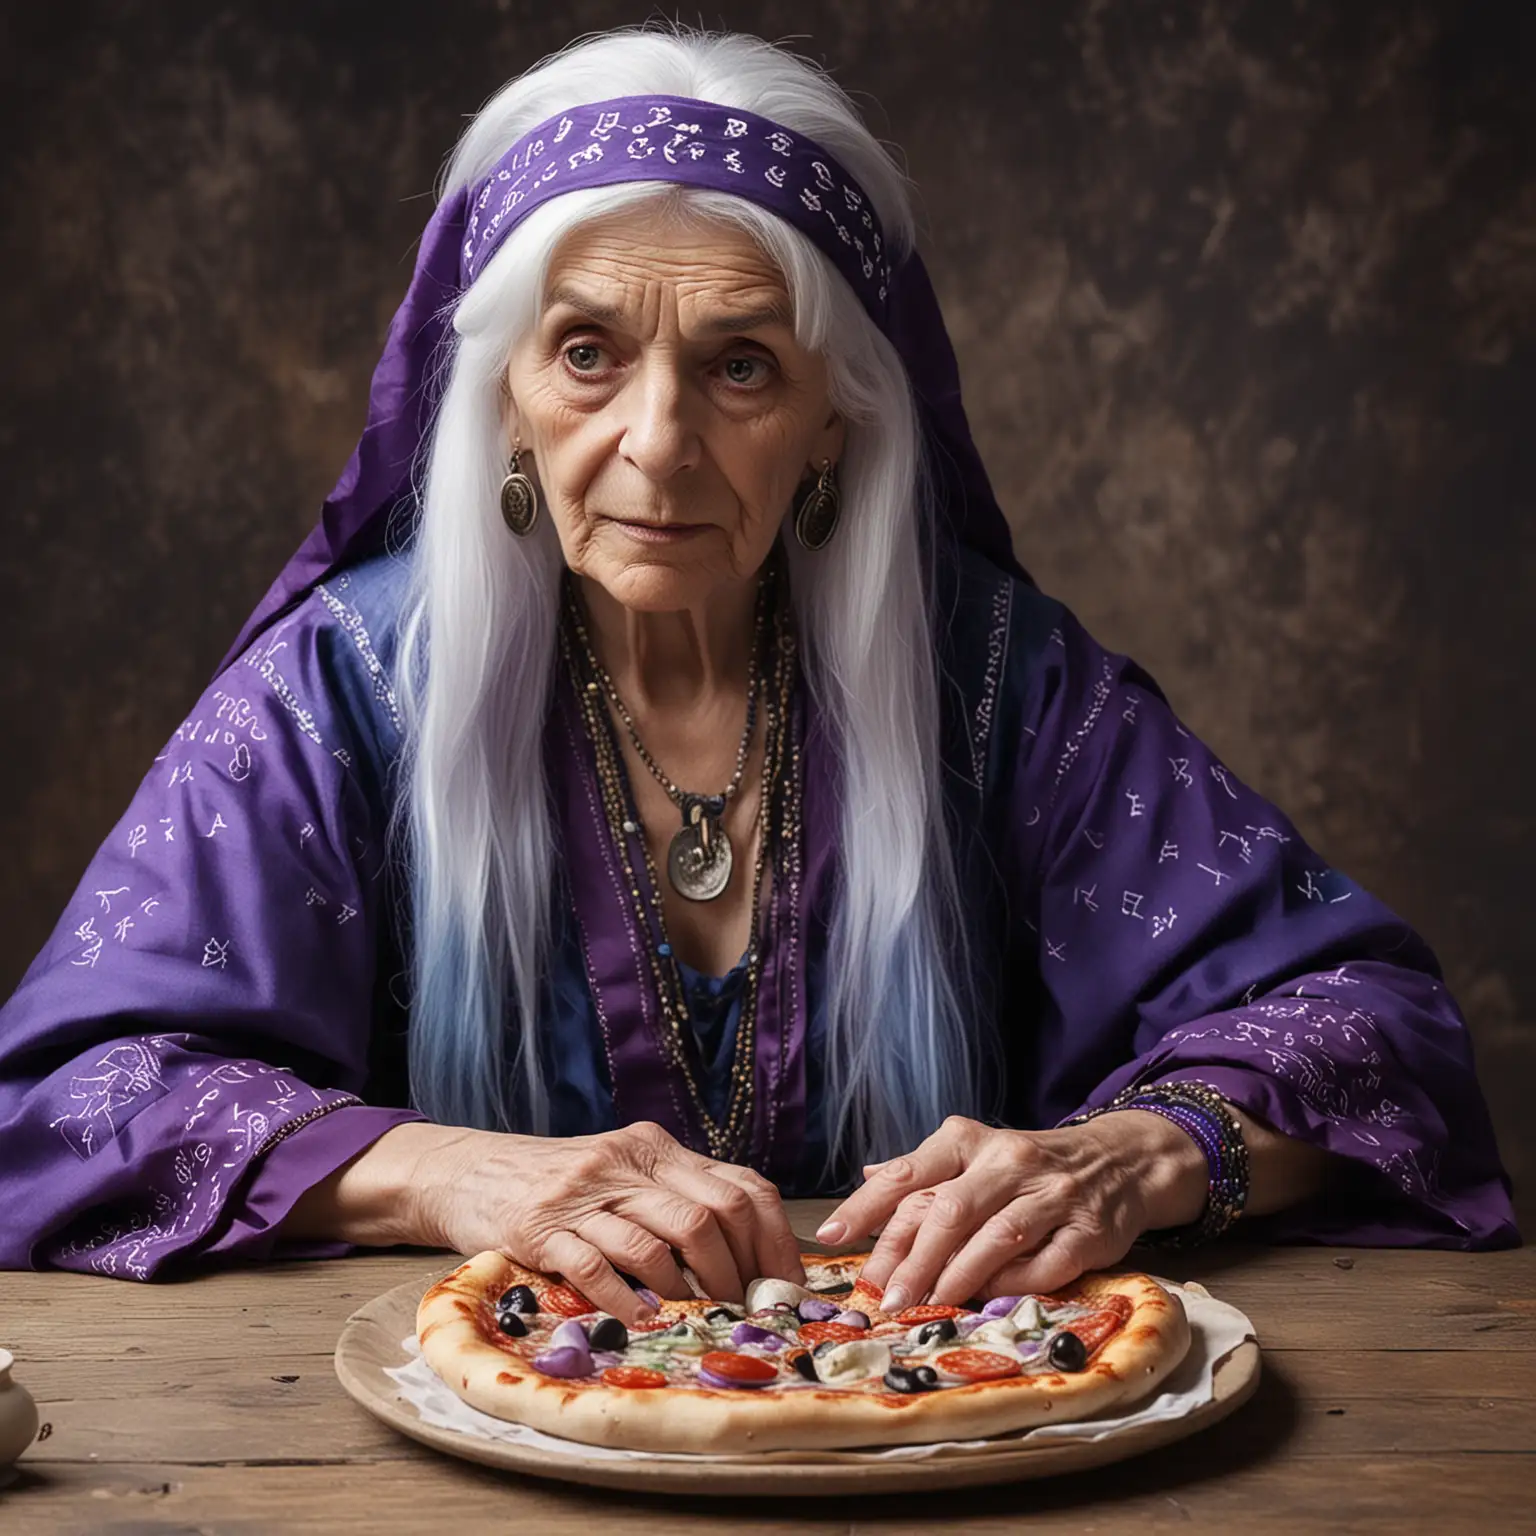 Elderly Fortune Teller in Blue and Purple Garb Foretells Future Over Pizza